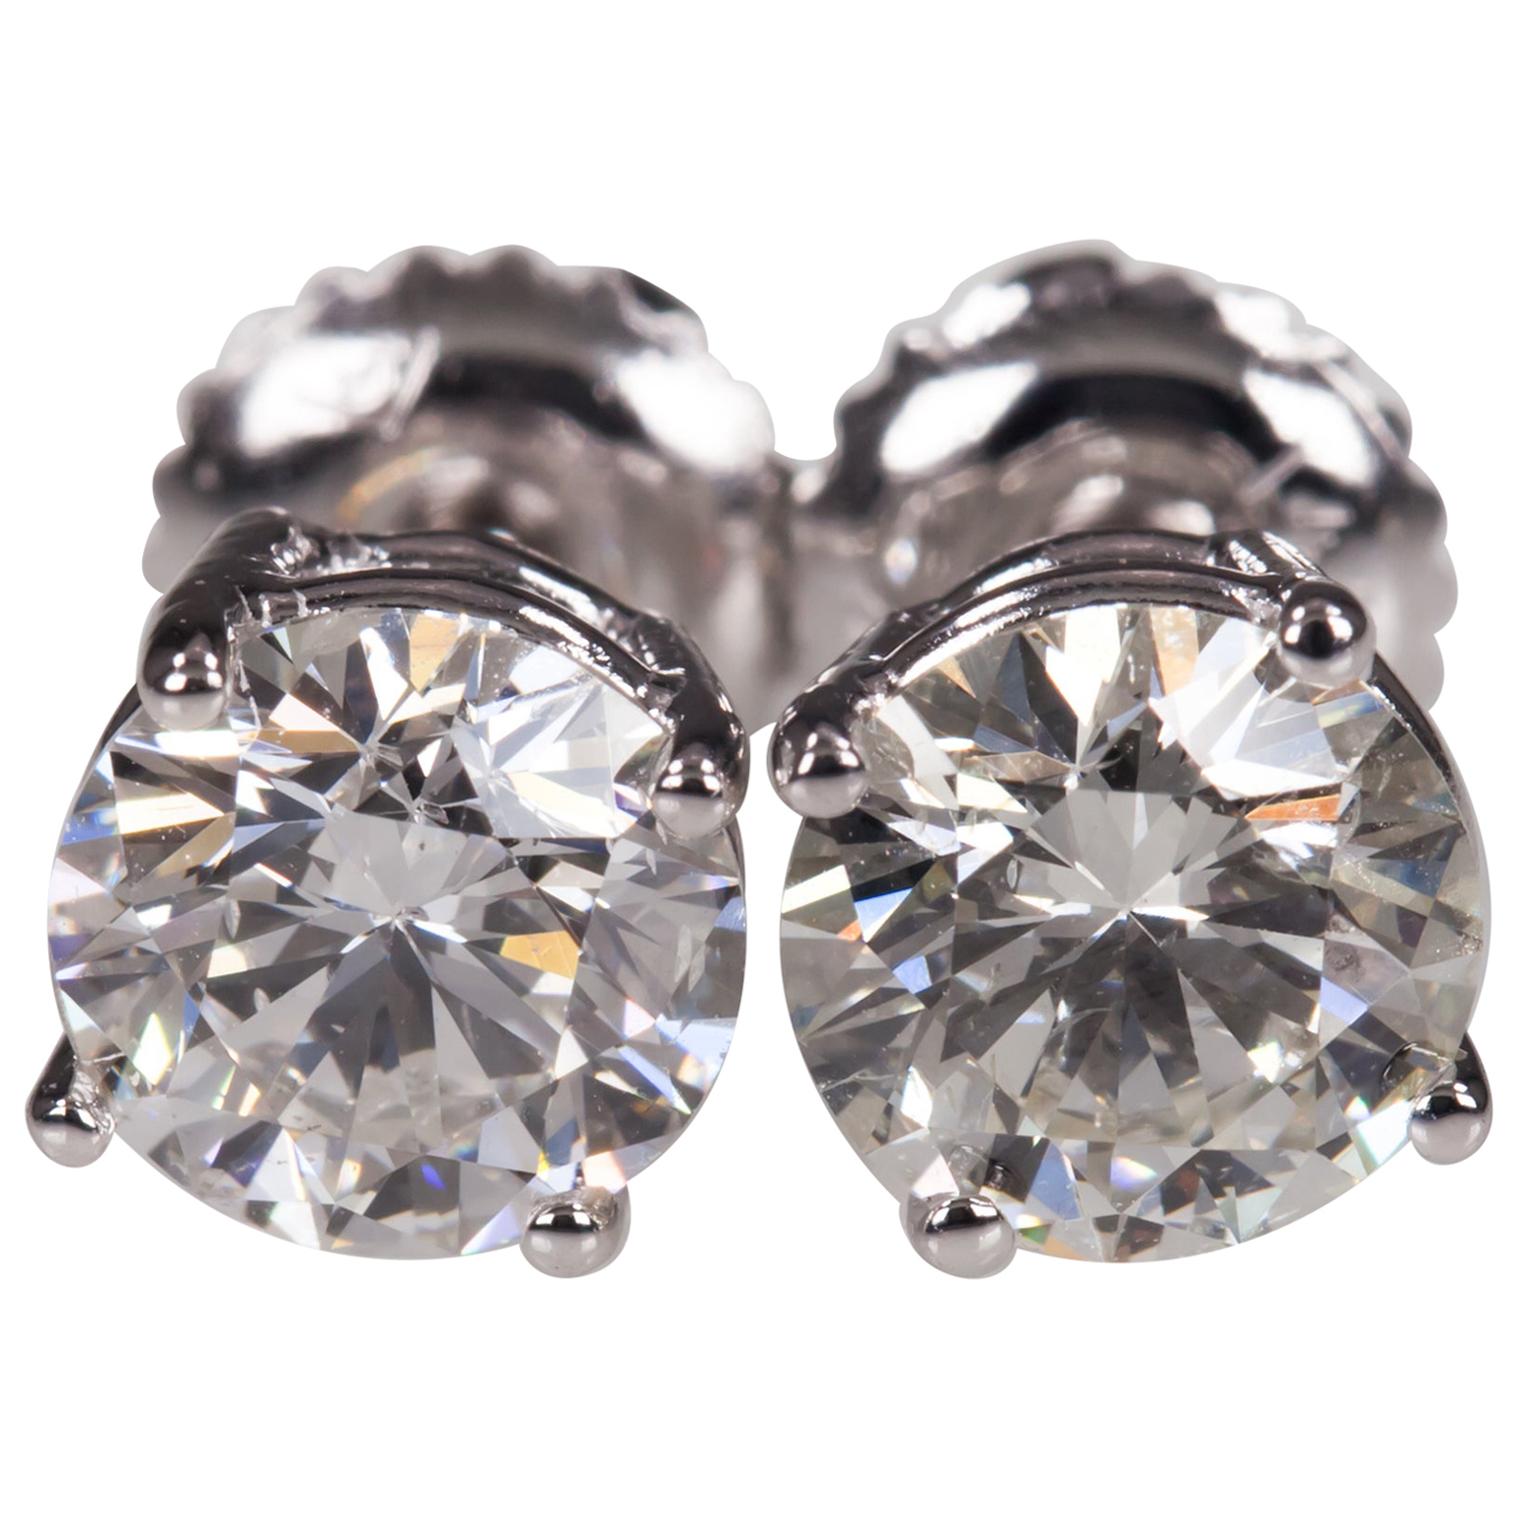 Gorgeous 1.72 Carat Round Diamond Stud Earrings in White Gold